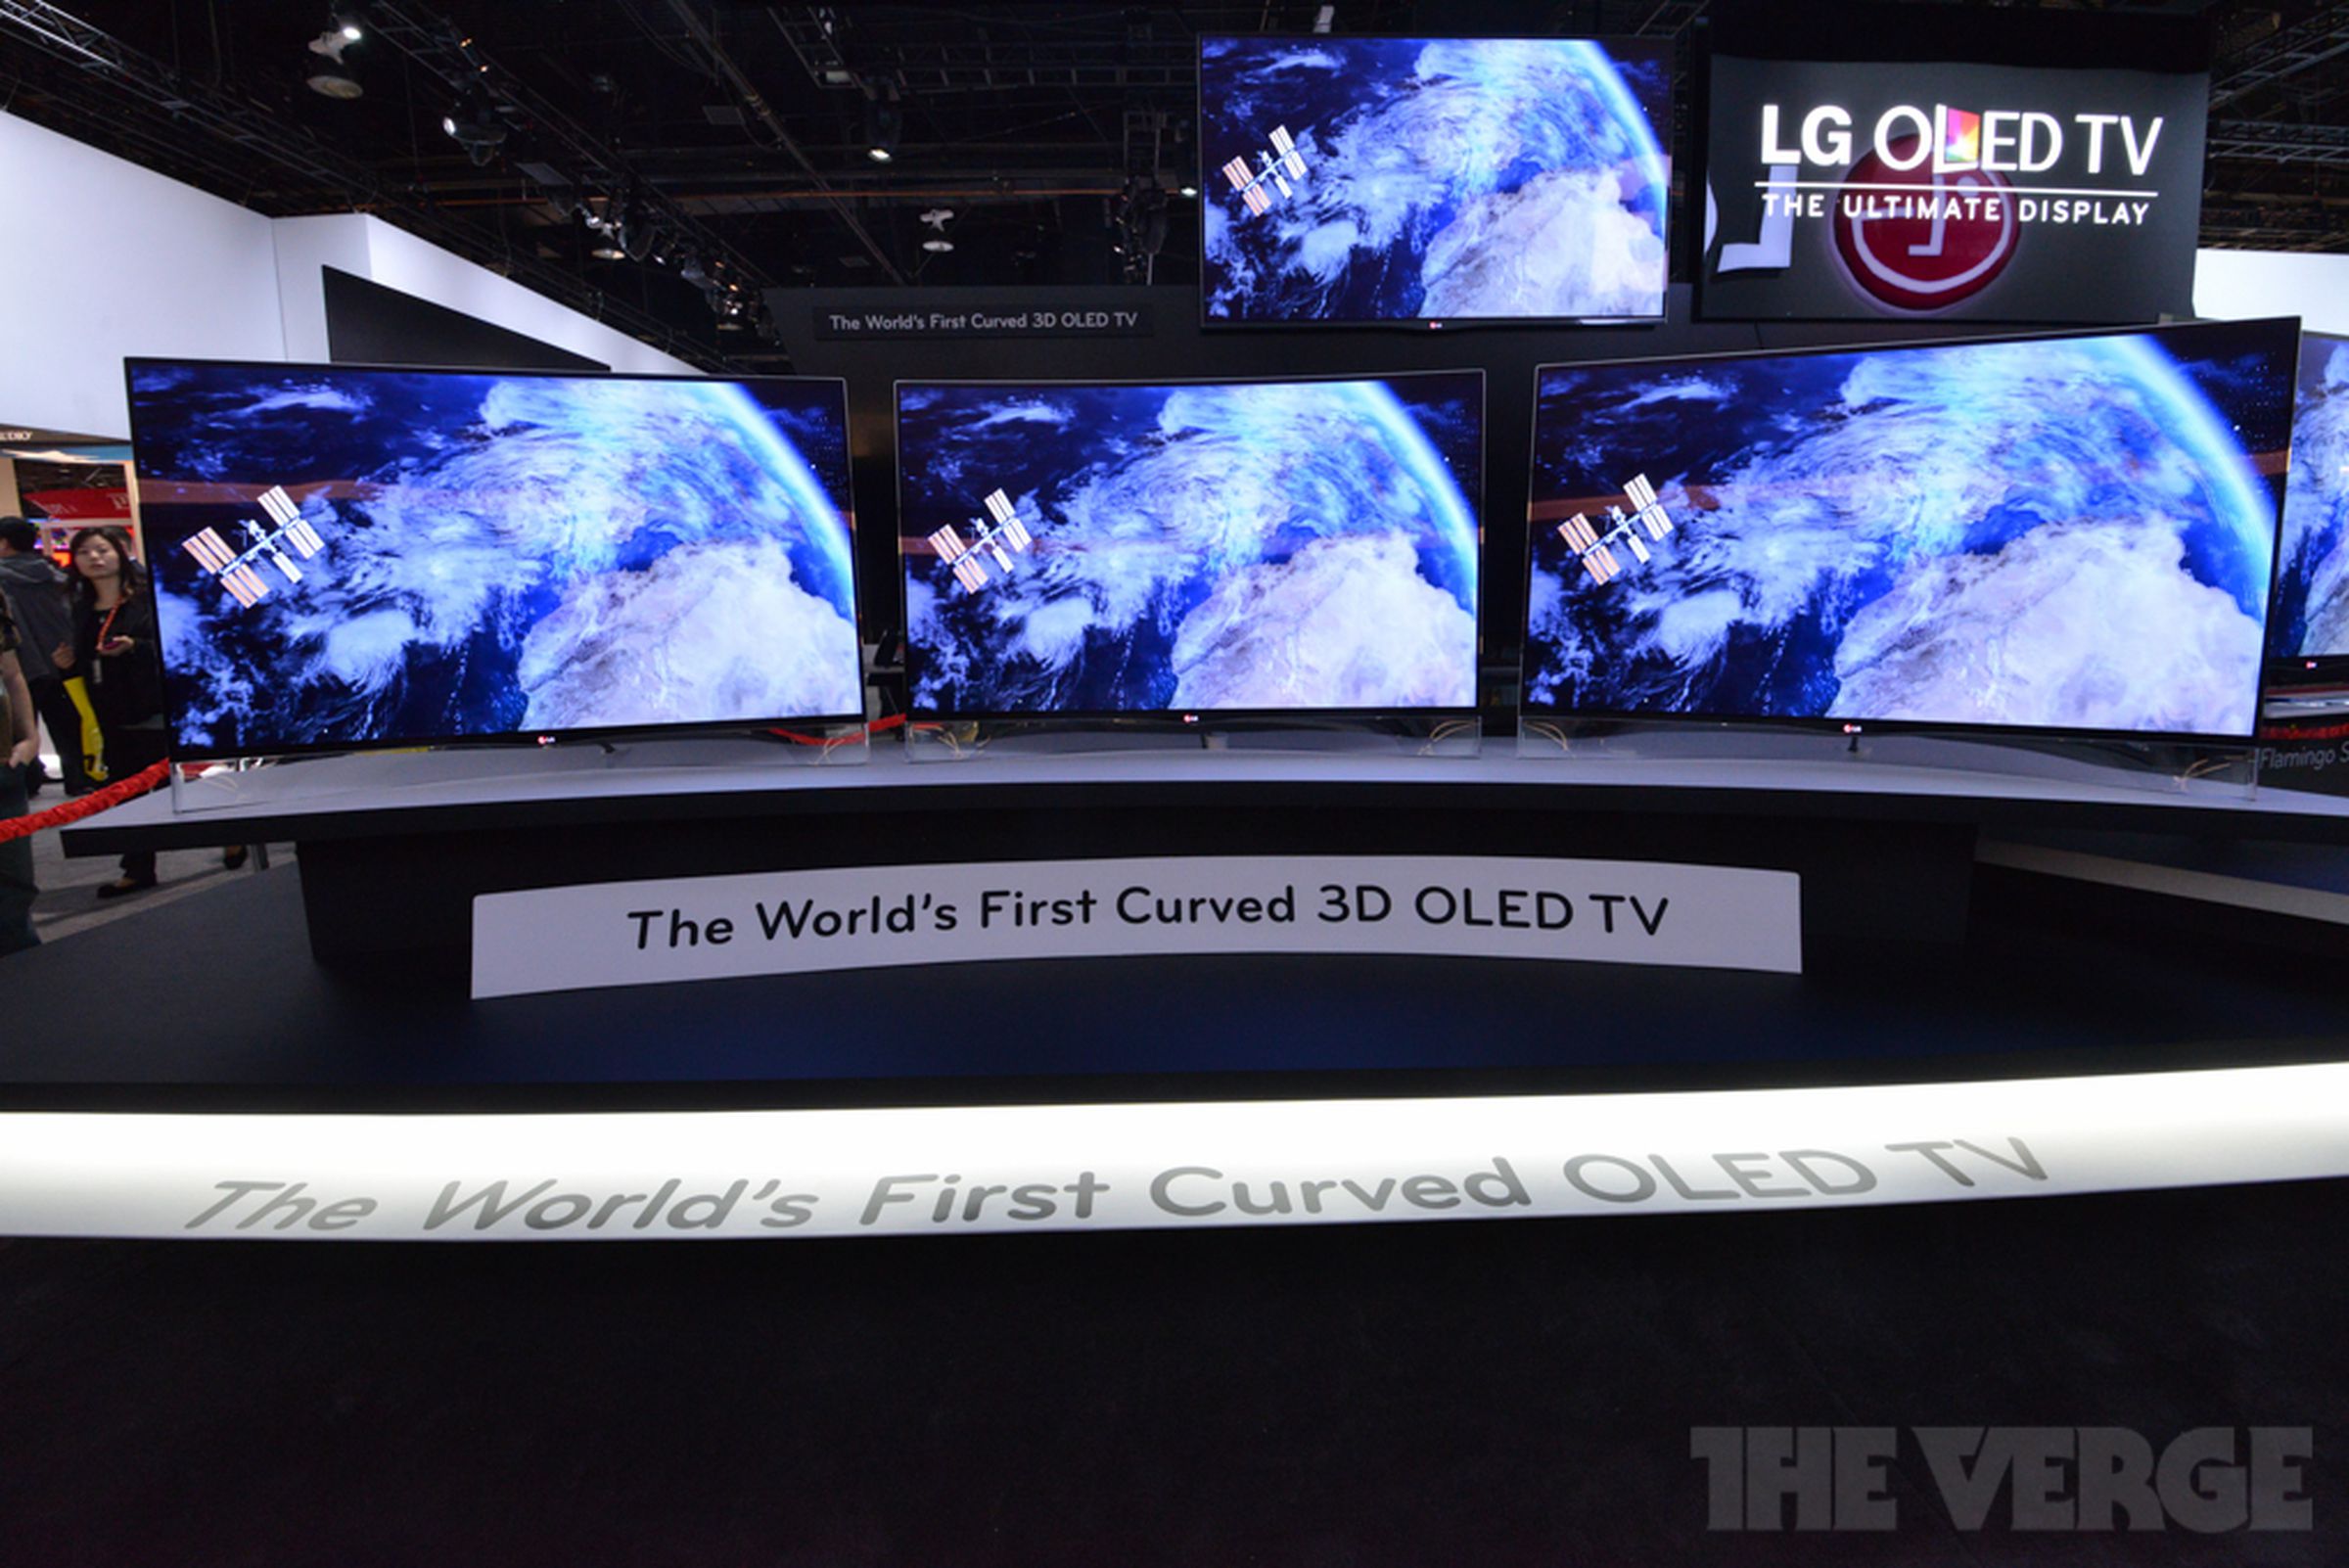 LG curved OLED TV hands-on pictures